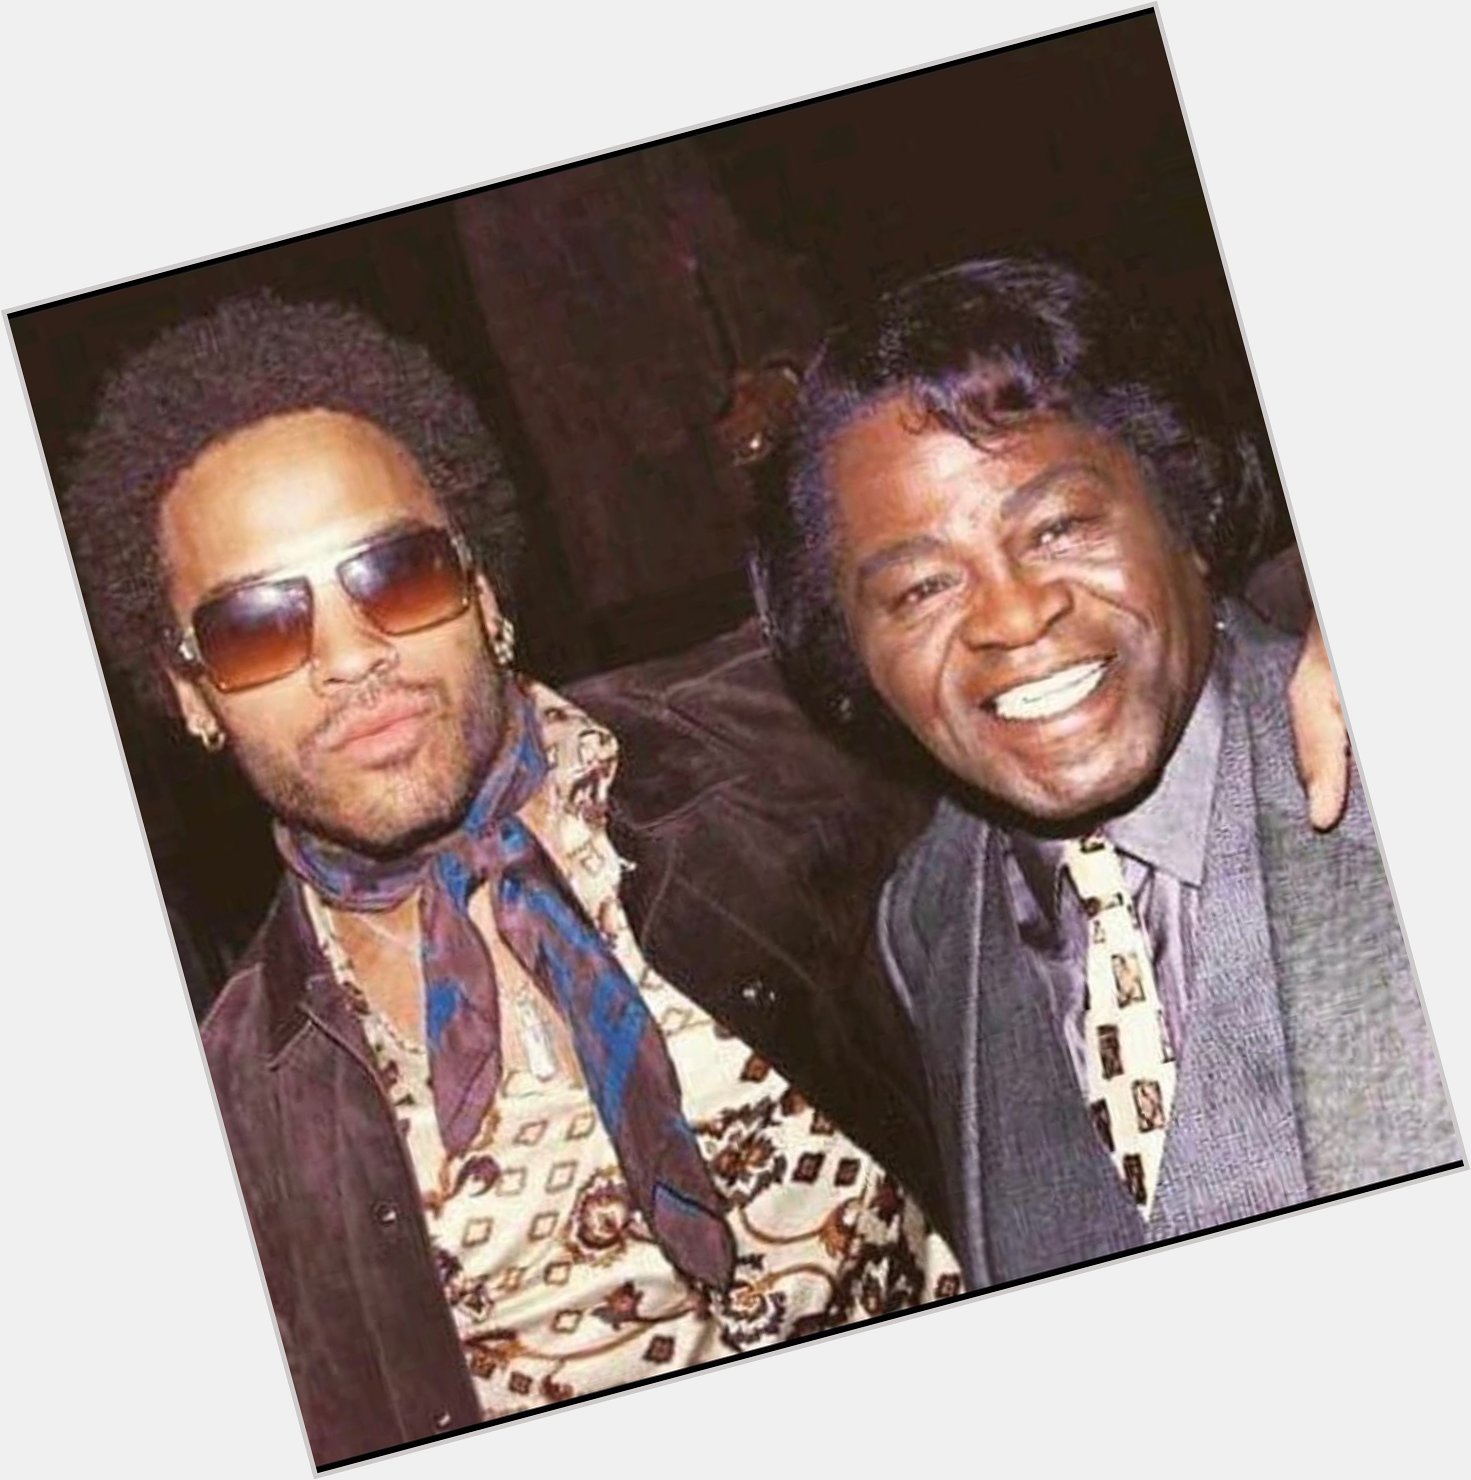 Happy Birthday, Mr. James Brown. Thank you again for blessing us with the funk and the one! 